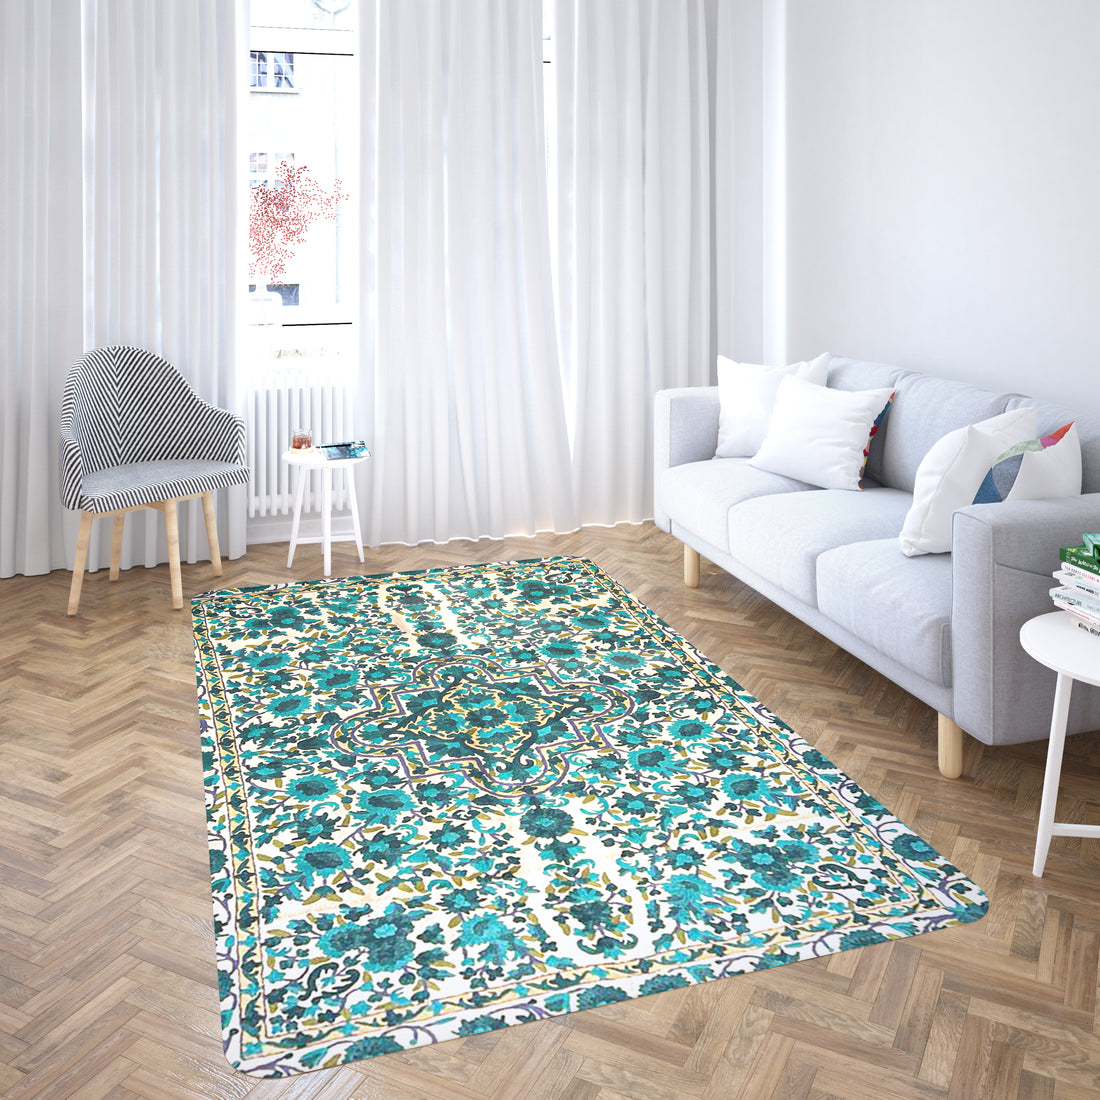 White Teal Crewel Wool Chainstitch Rug